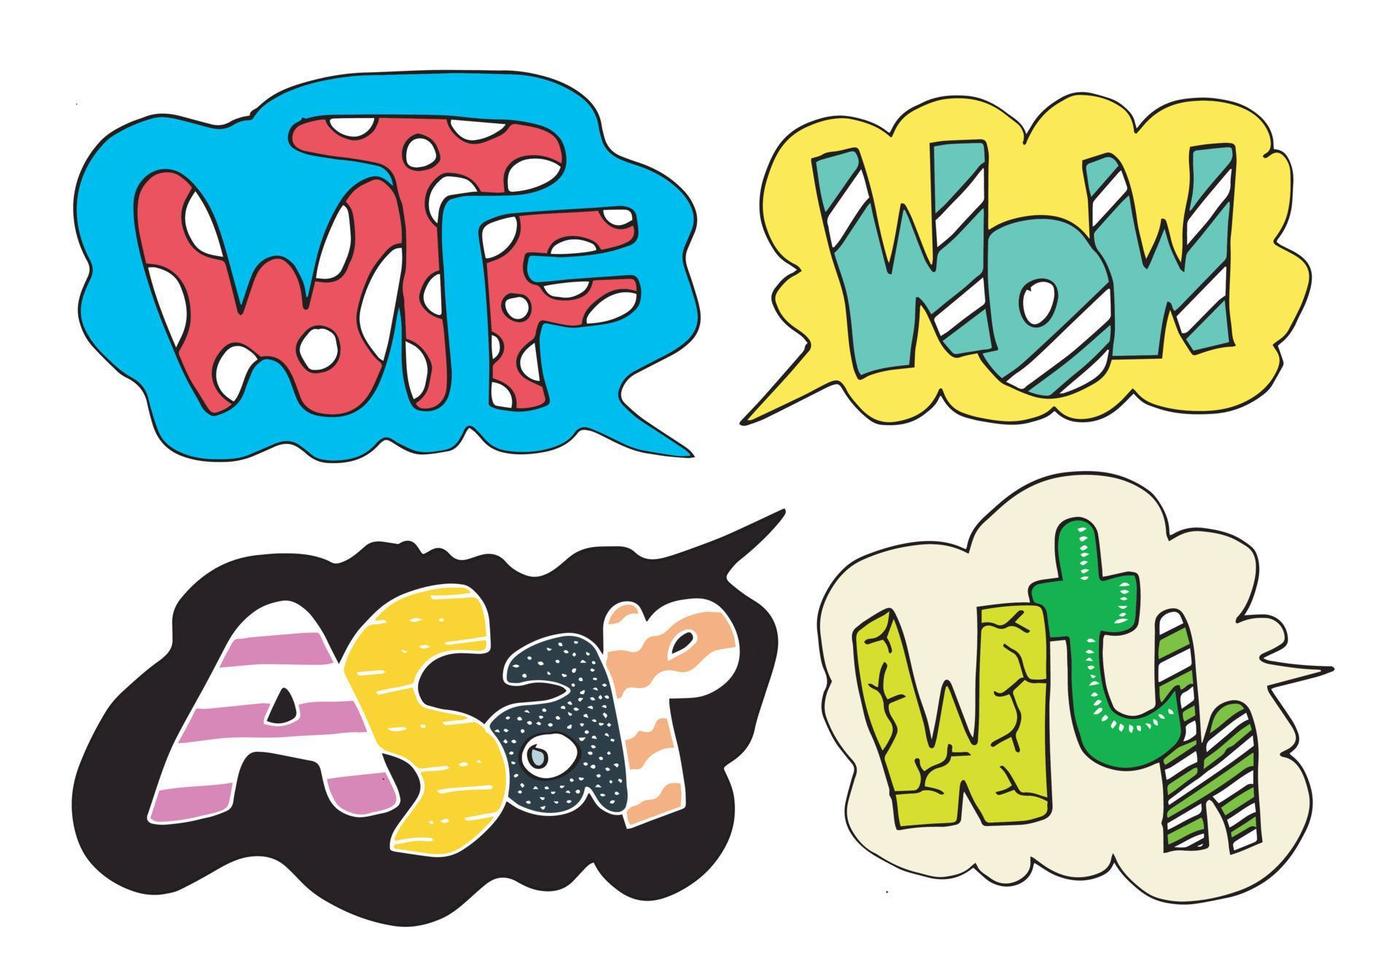 Set of Comic Text, Vector Comic Speach, Pop Art style.WTF, WTH, WOW and ASAP funny text bubbles